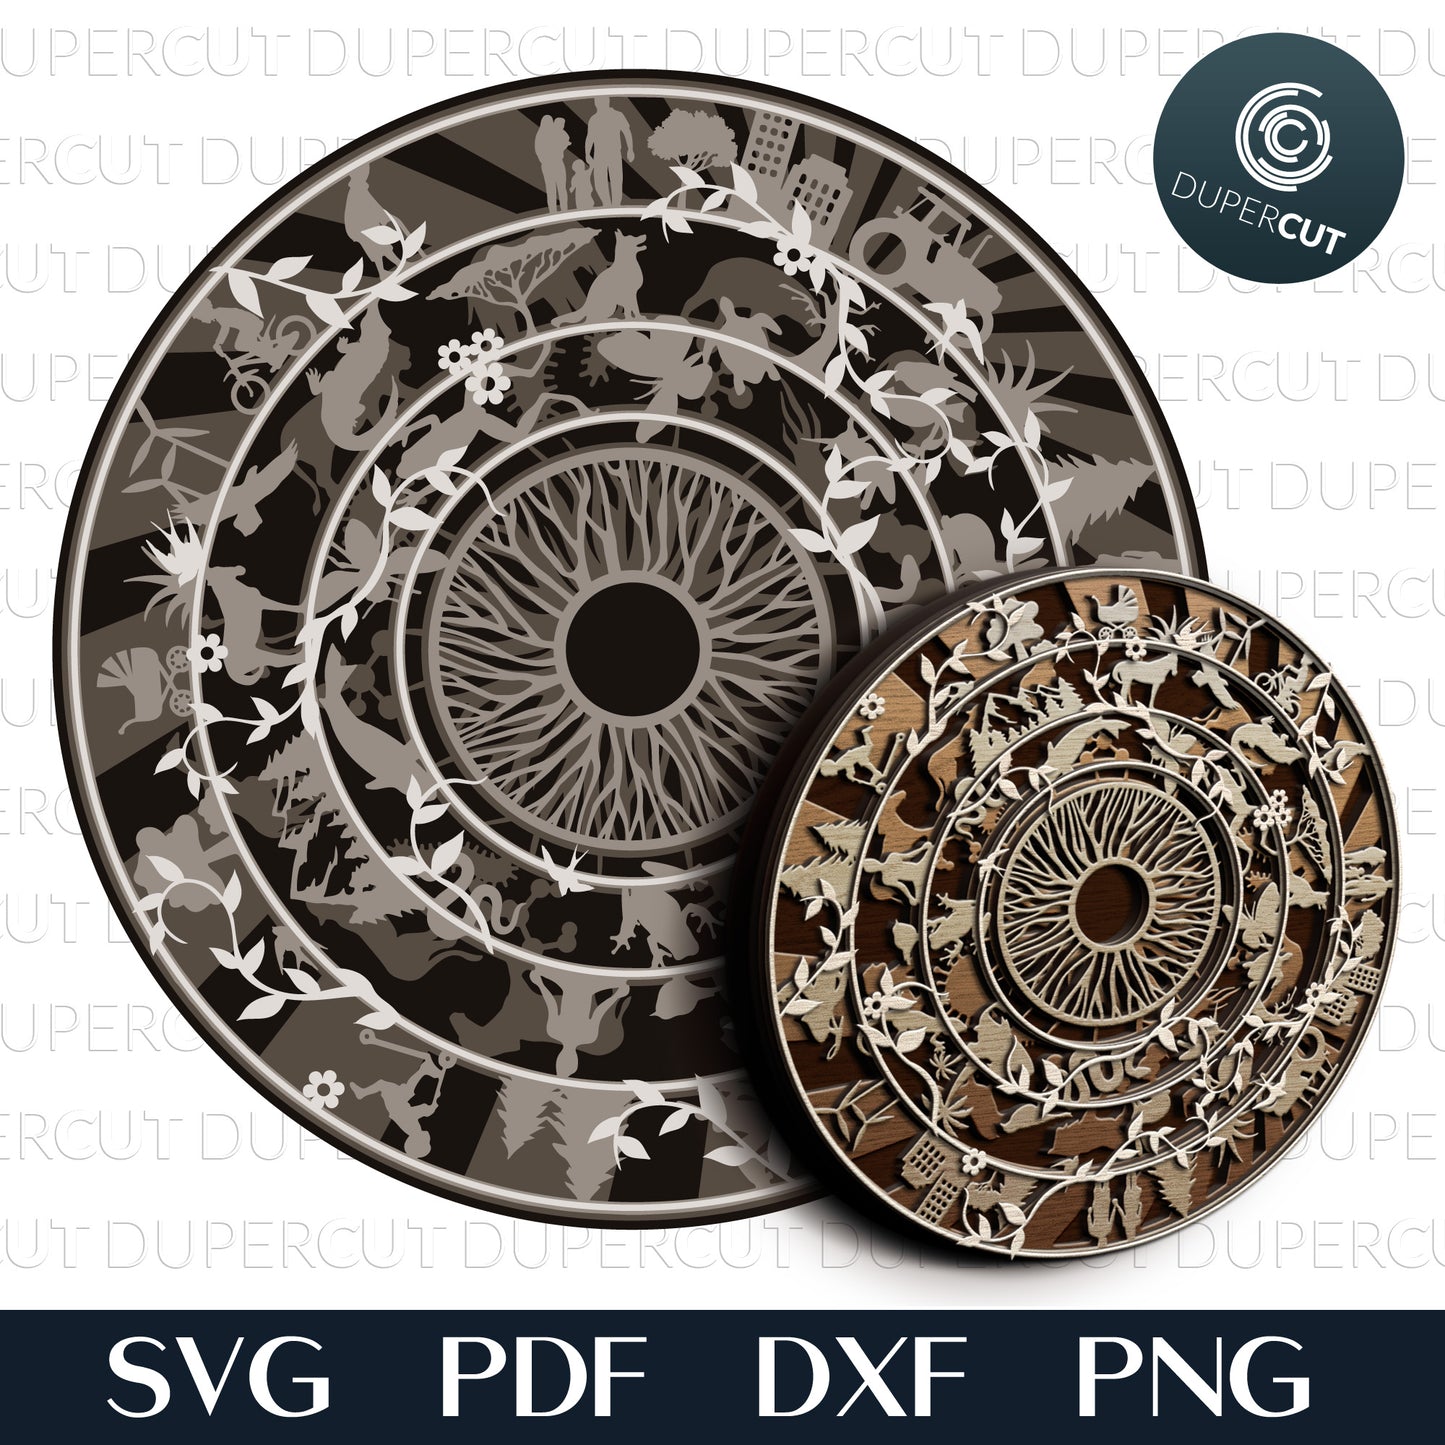 Circle of life - multi layered cutting files - SVG PDF DXF vector template for laser machines Glowforge, Cricut, Silhouette, CNC Plasma